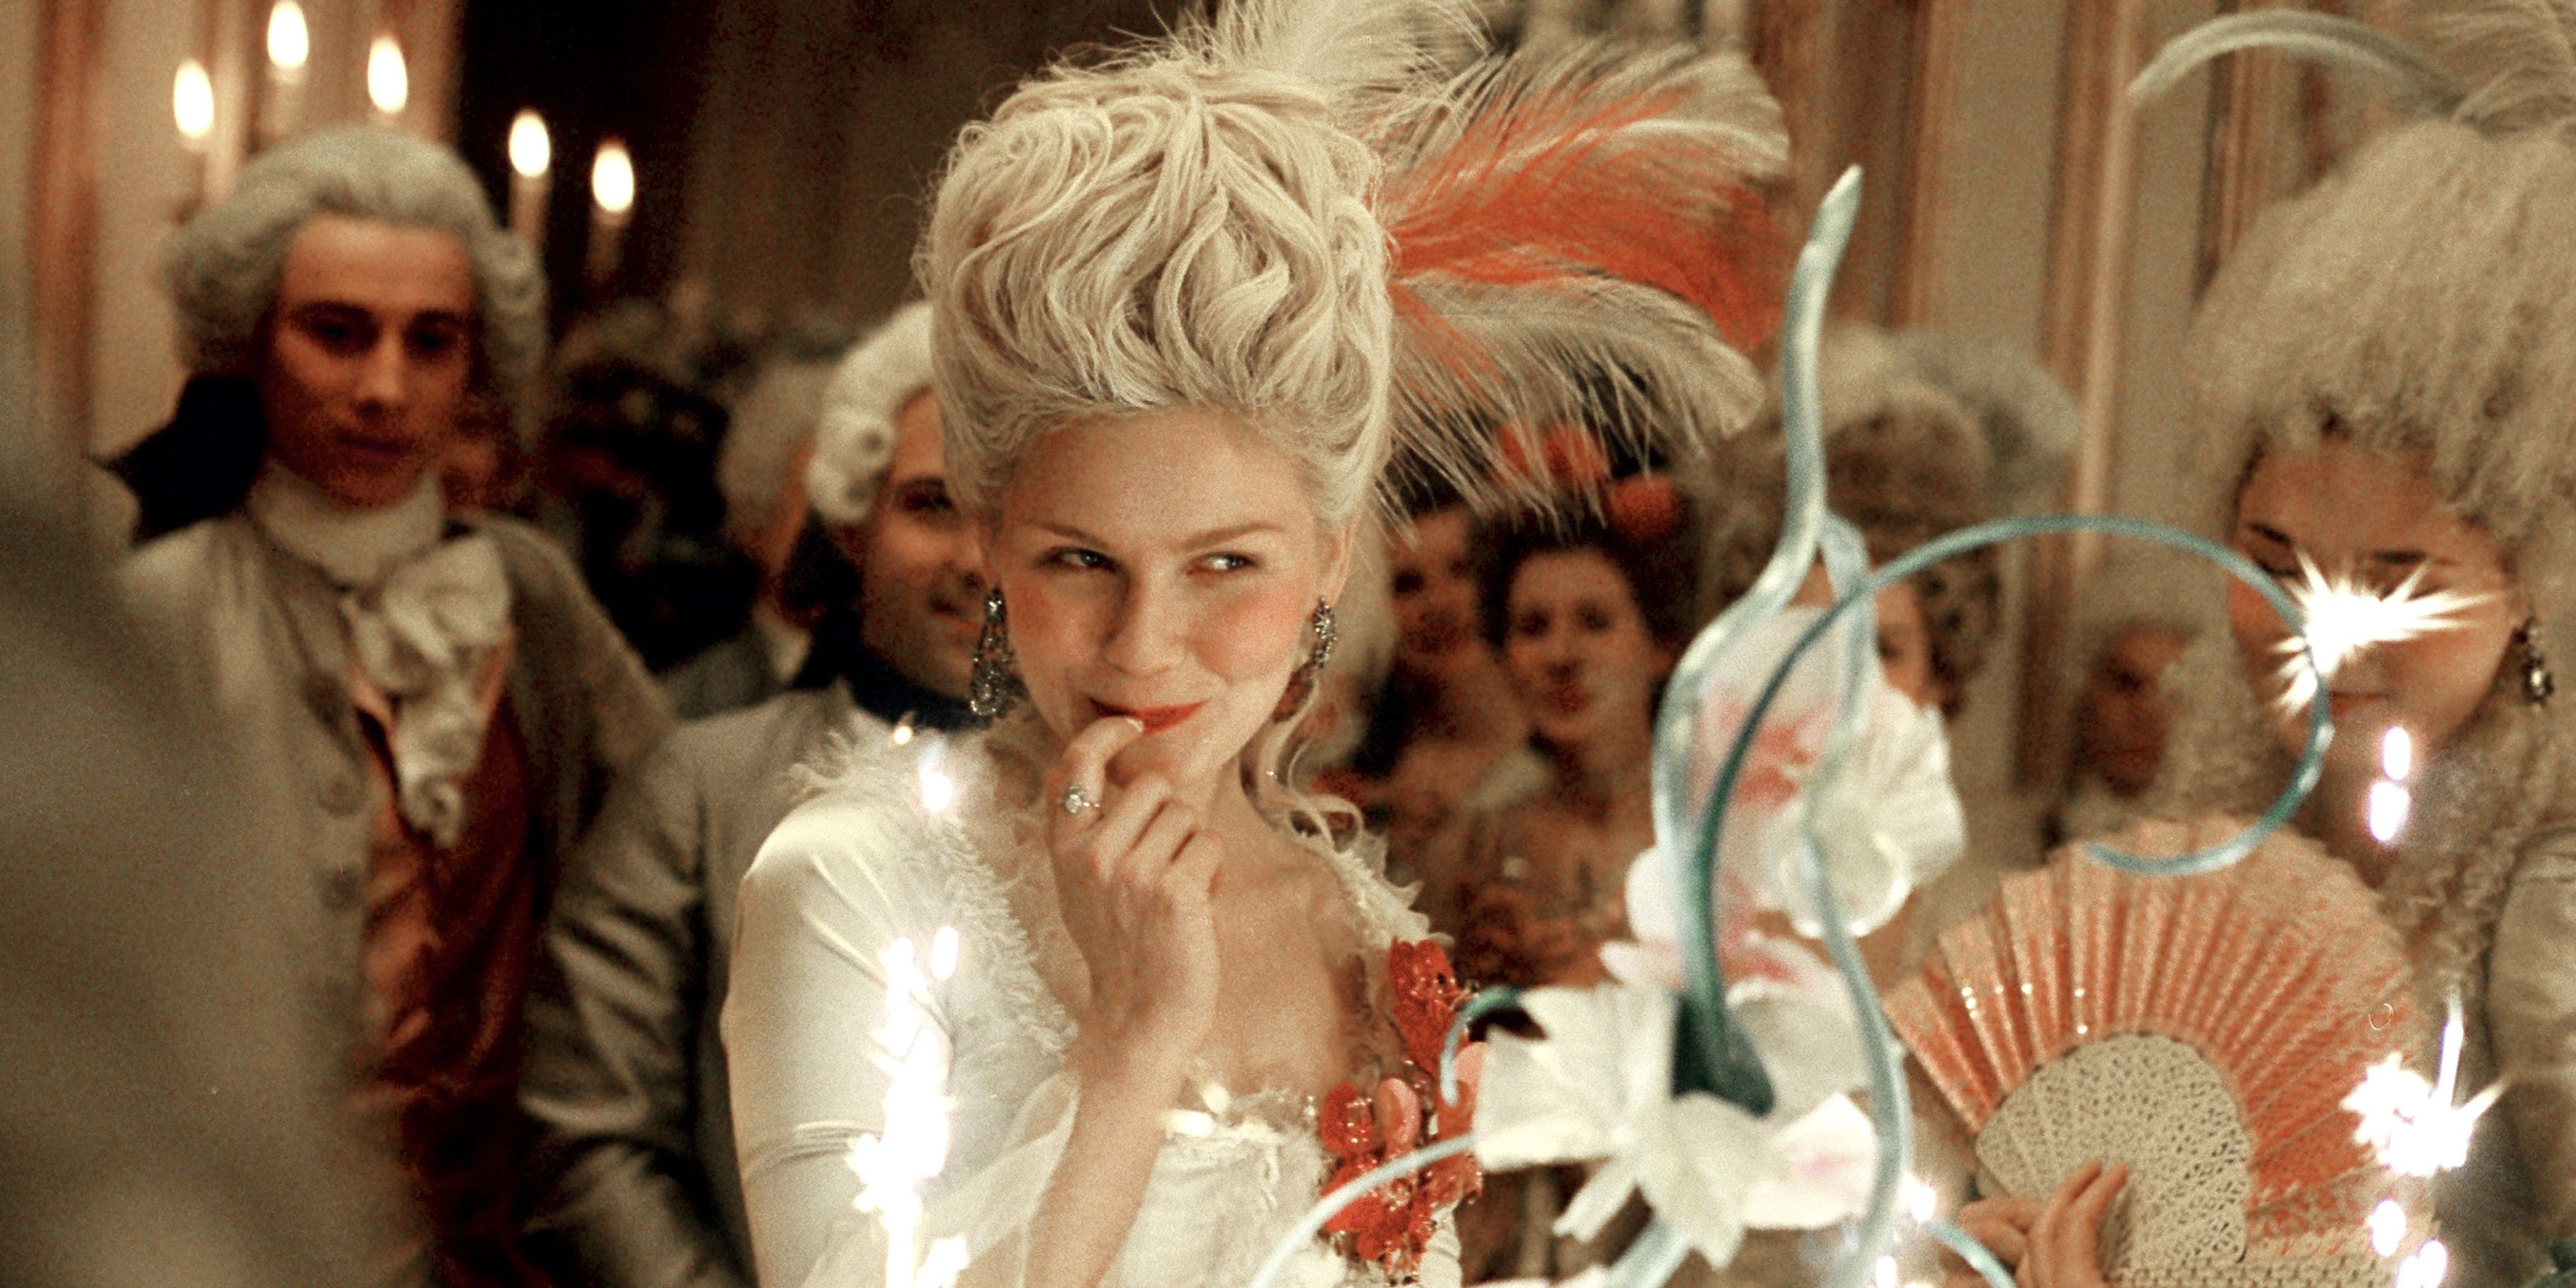 Marie Antoinette smirks among a crowd wearing powdered wigs at Versailles during a party